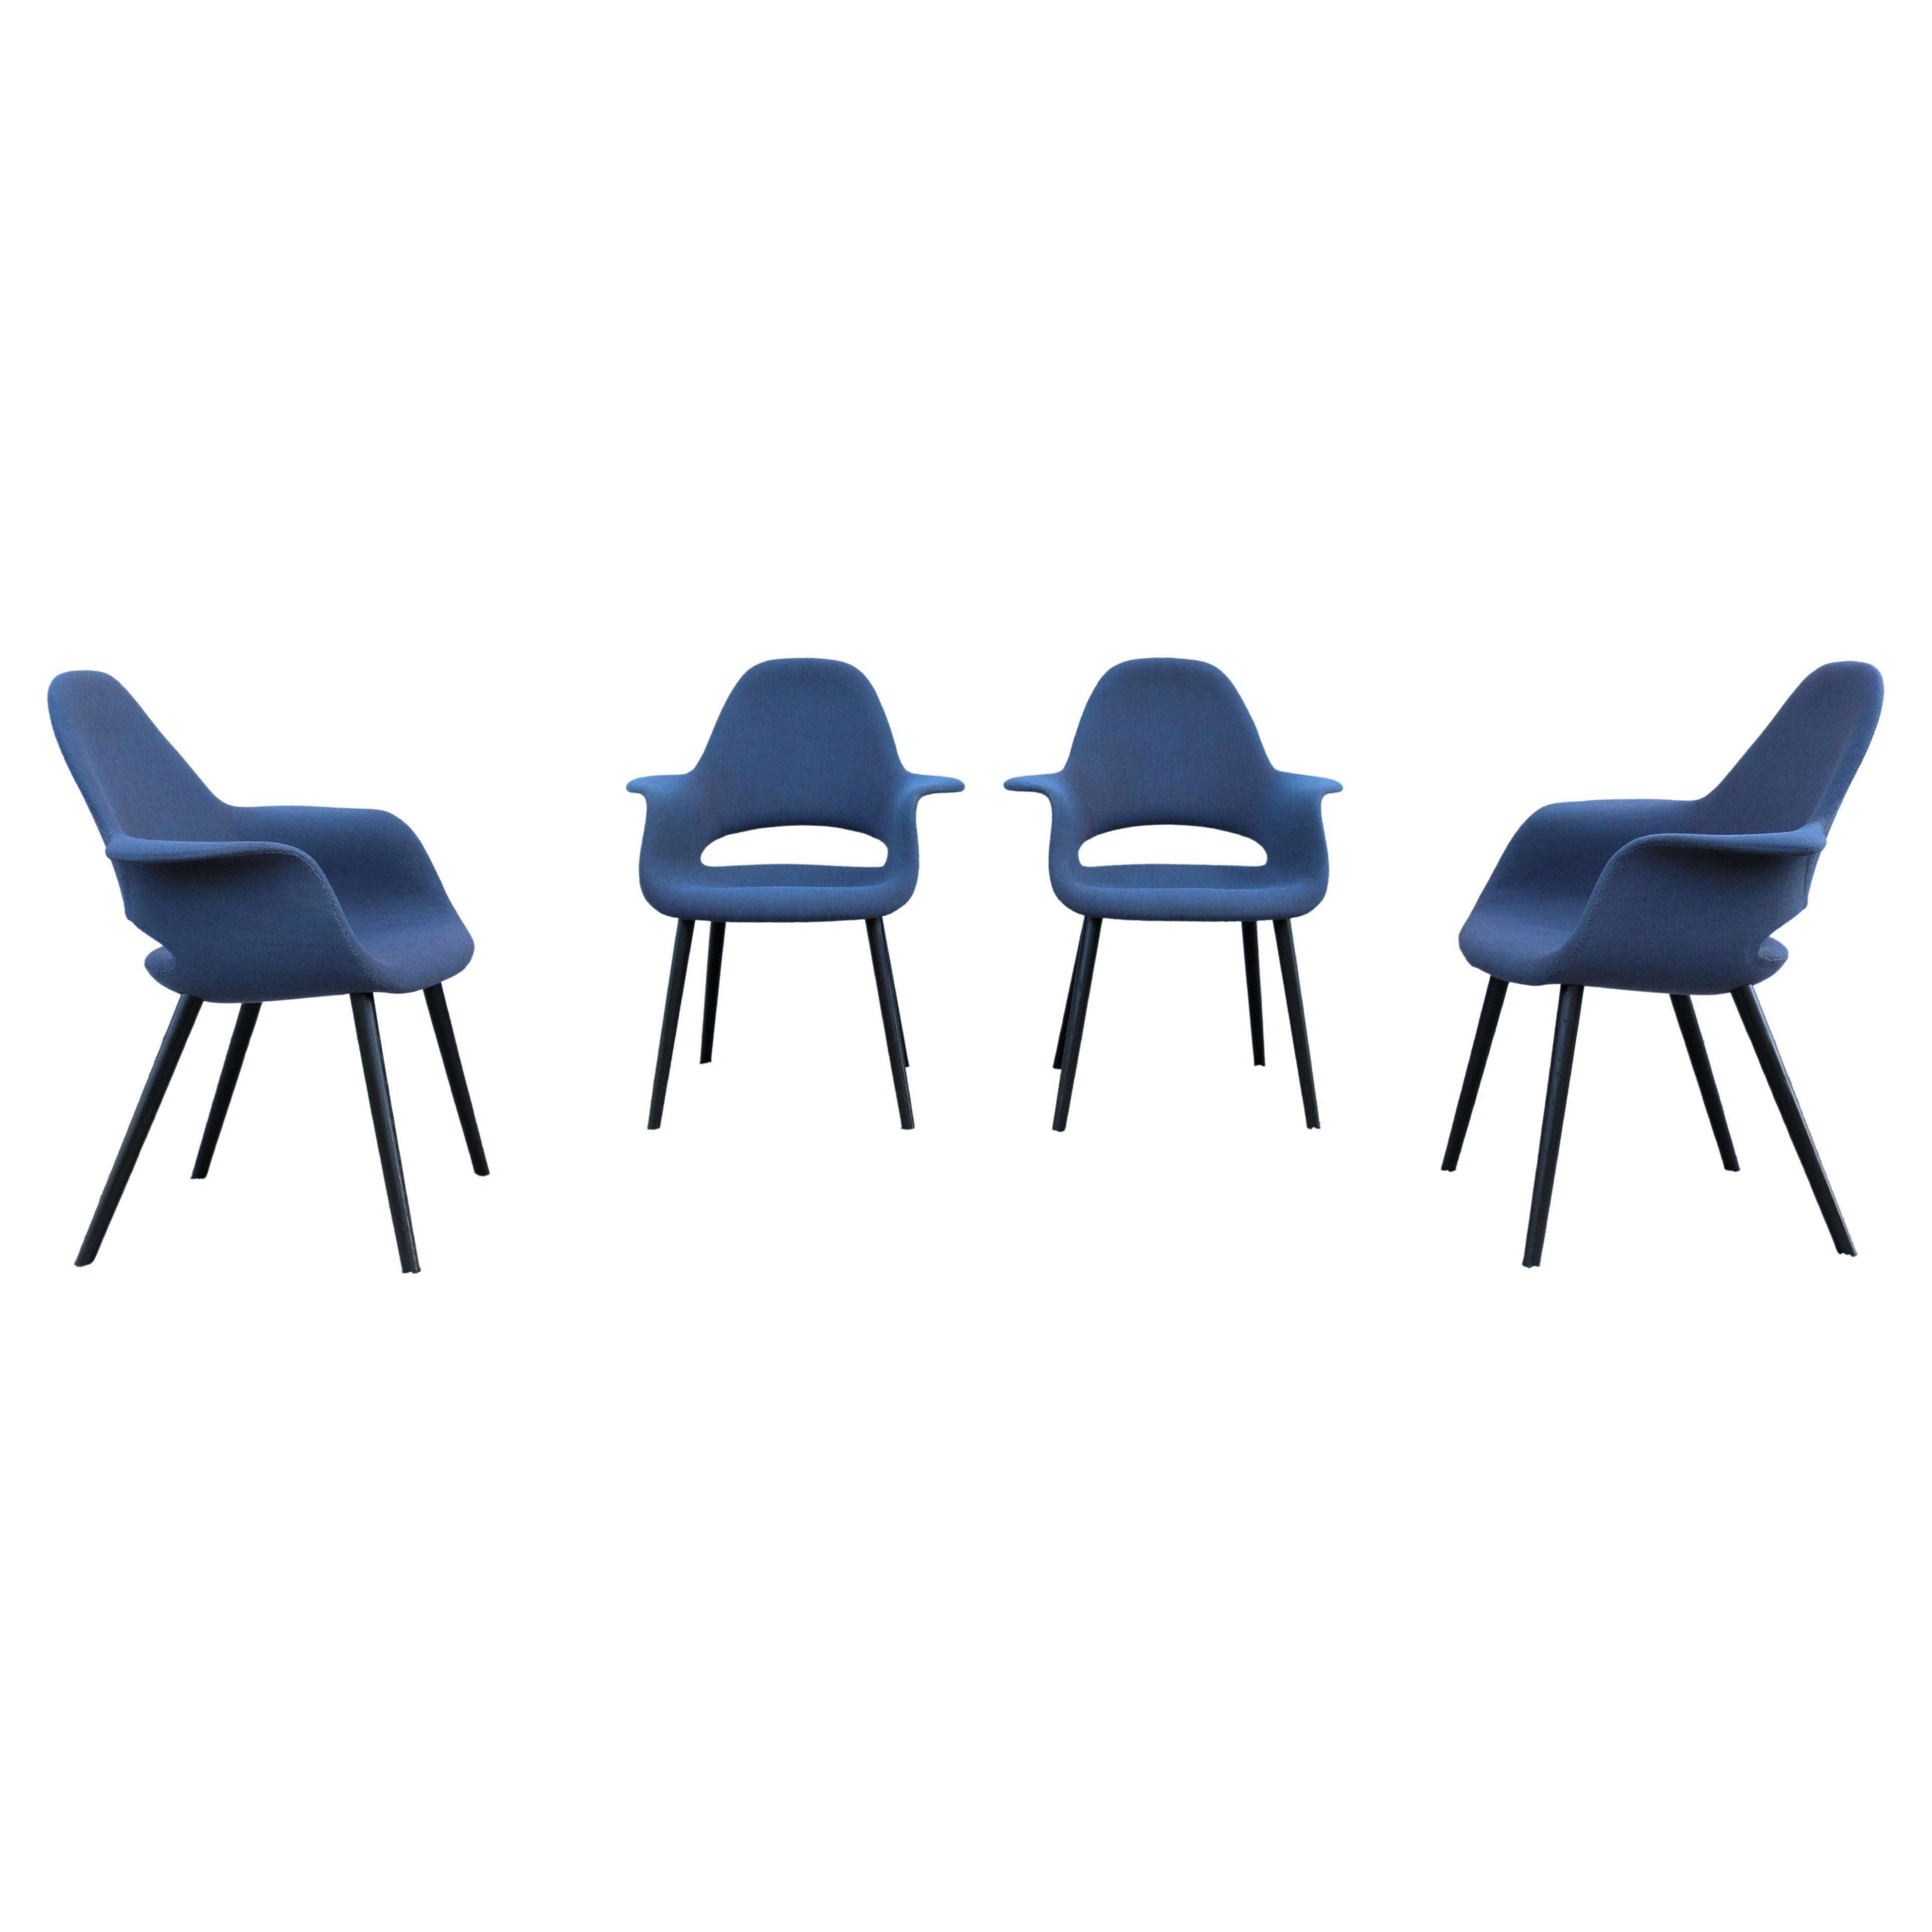 Charles Eames & Eero Saarinen for Vitra Organic Conference Chairs, Set of 4 For Sale